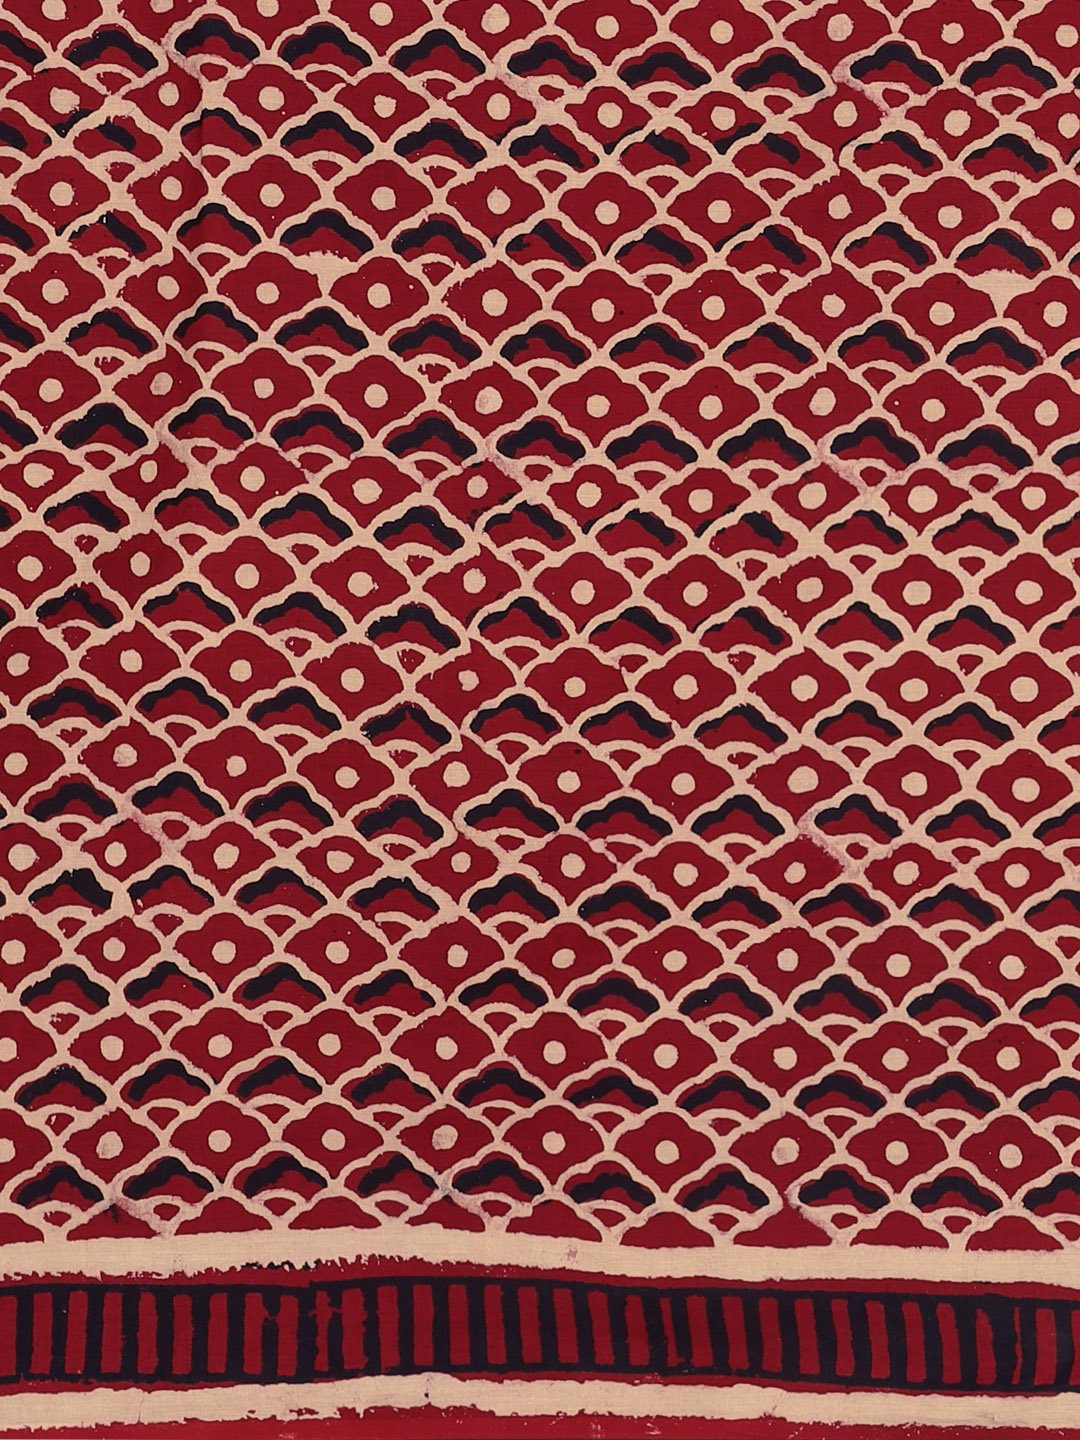 Red & Beige Mud Resist Handblock Print Batik Handcrafted Cotton Saree-Saree-Kalakari India-BHKPSA0033-Batik, Cotton, Geographical Indication, Hand Blocks, Hand Crafted, Heritage Prints, Sarees, Sustainable Fabrics-[Linen,Ethnic,wear,Fashionista,Handloom,Handicraft,Indigo,blockprint,block,print,Cotton,Chanderi,Blue, latest,classy,party,bollywood,trendy,summer,style,traditional,formal,elegant,unique,style,hand,block,print, dabu,booti,gift,present,glamorous,affordable,collectible,Sari,Saree,printed